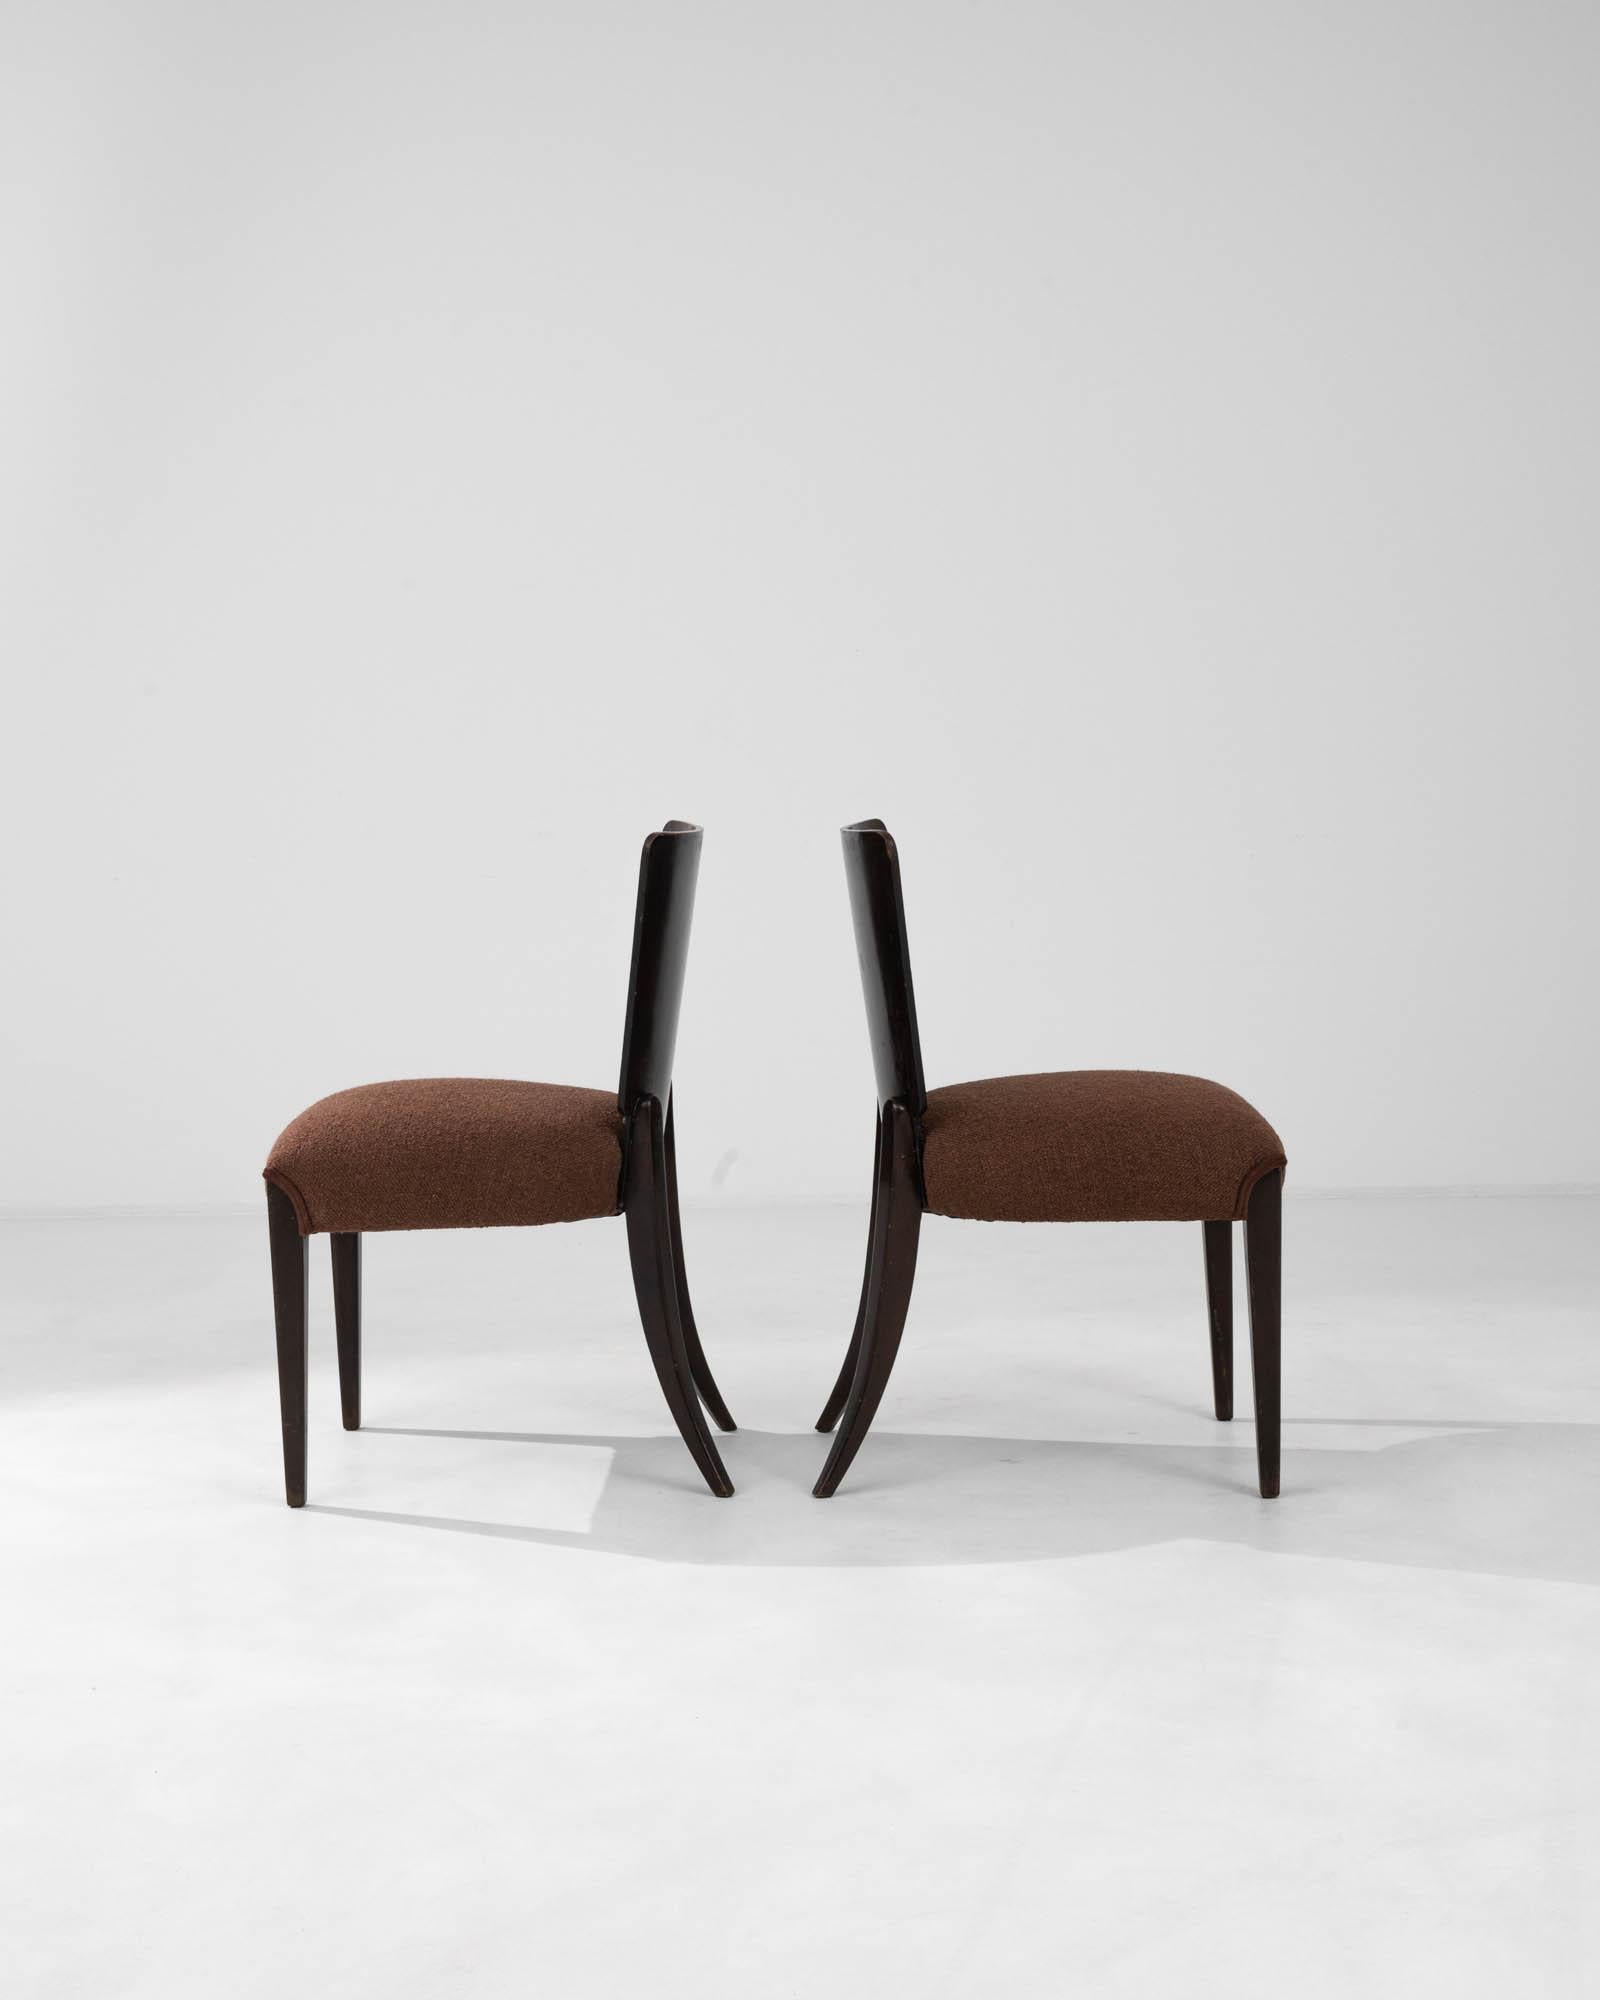 20th Century Czechia Upholstered Chairs By J. Halabala, a Pair For Sale 1